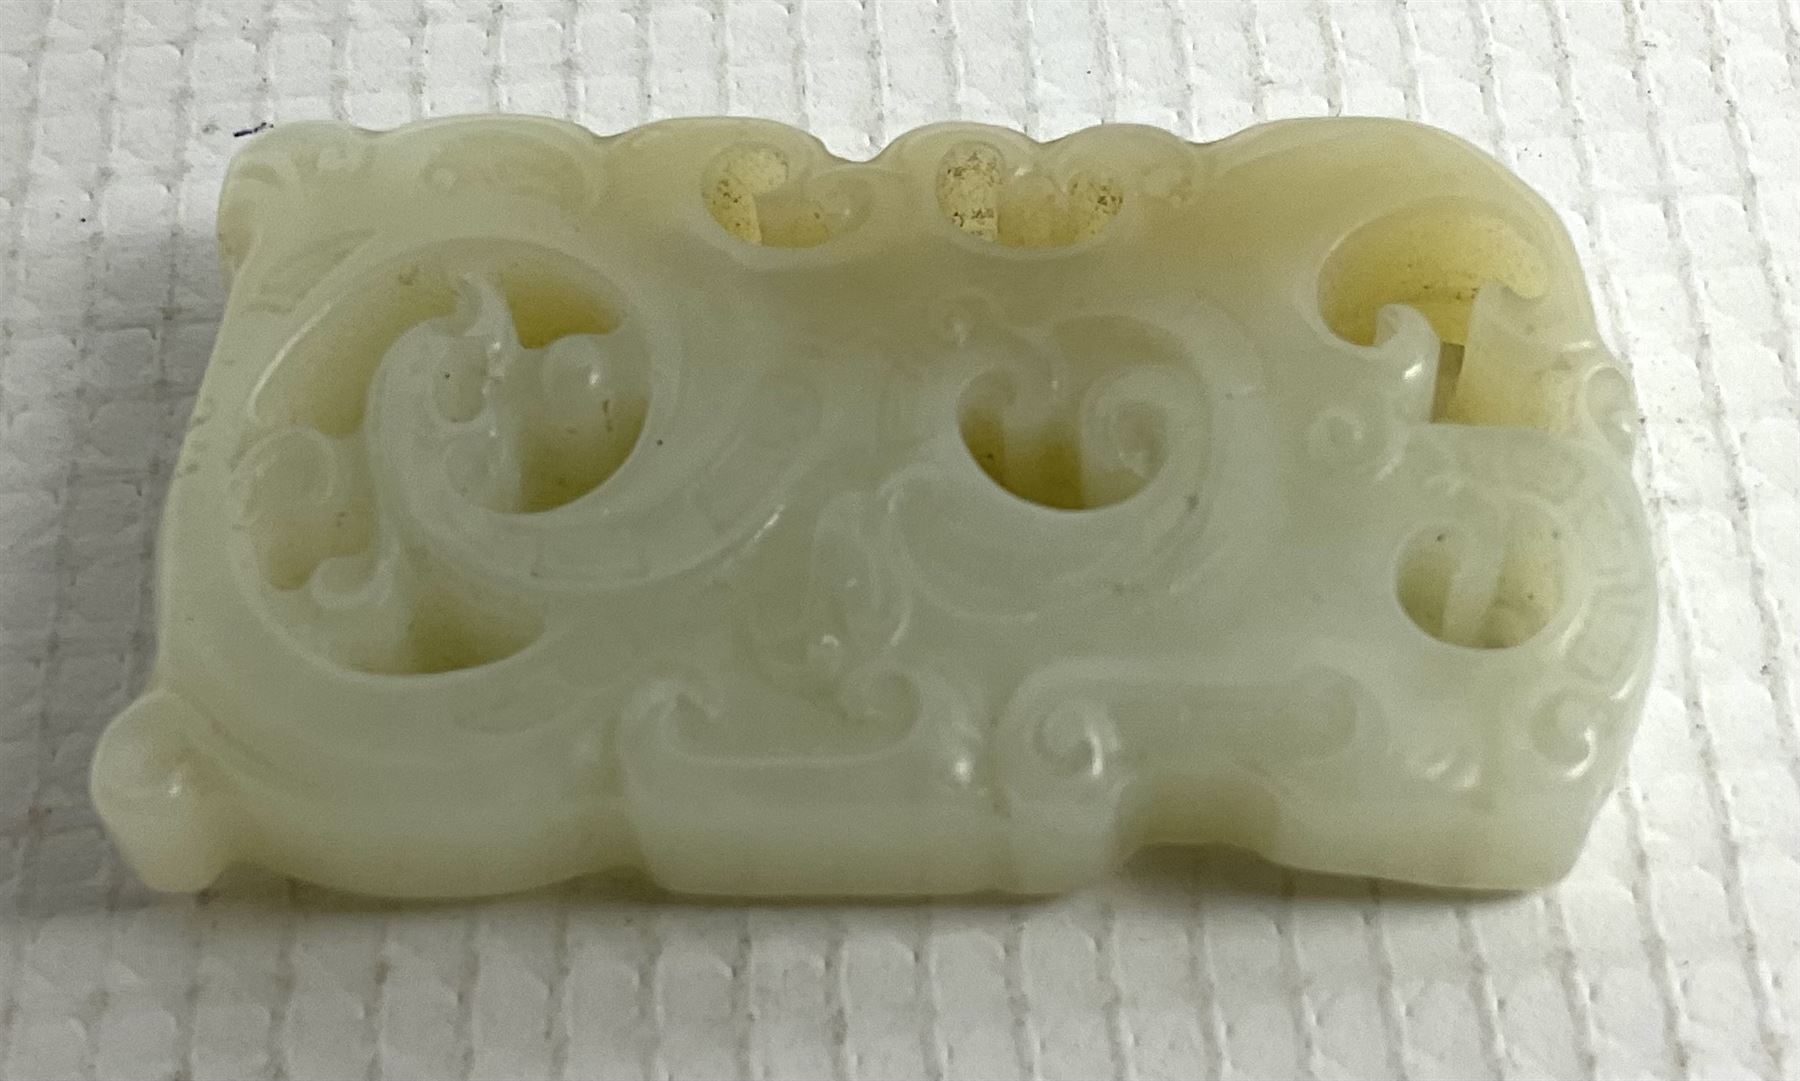 Chinese jade rectangular plaque with carved and pierced decoration 4.5cm x 2.5cm - Image 3 of 3